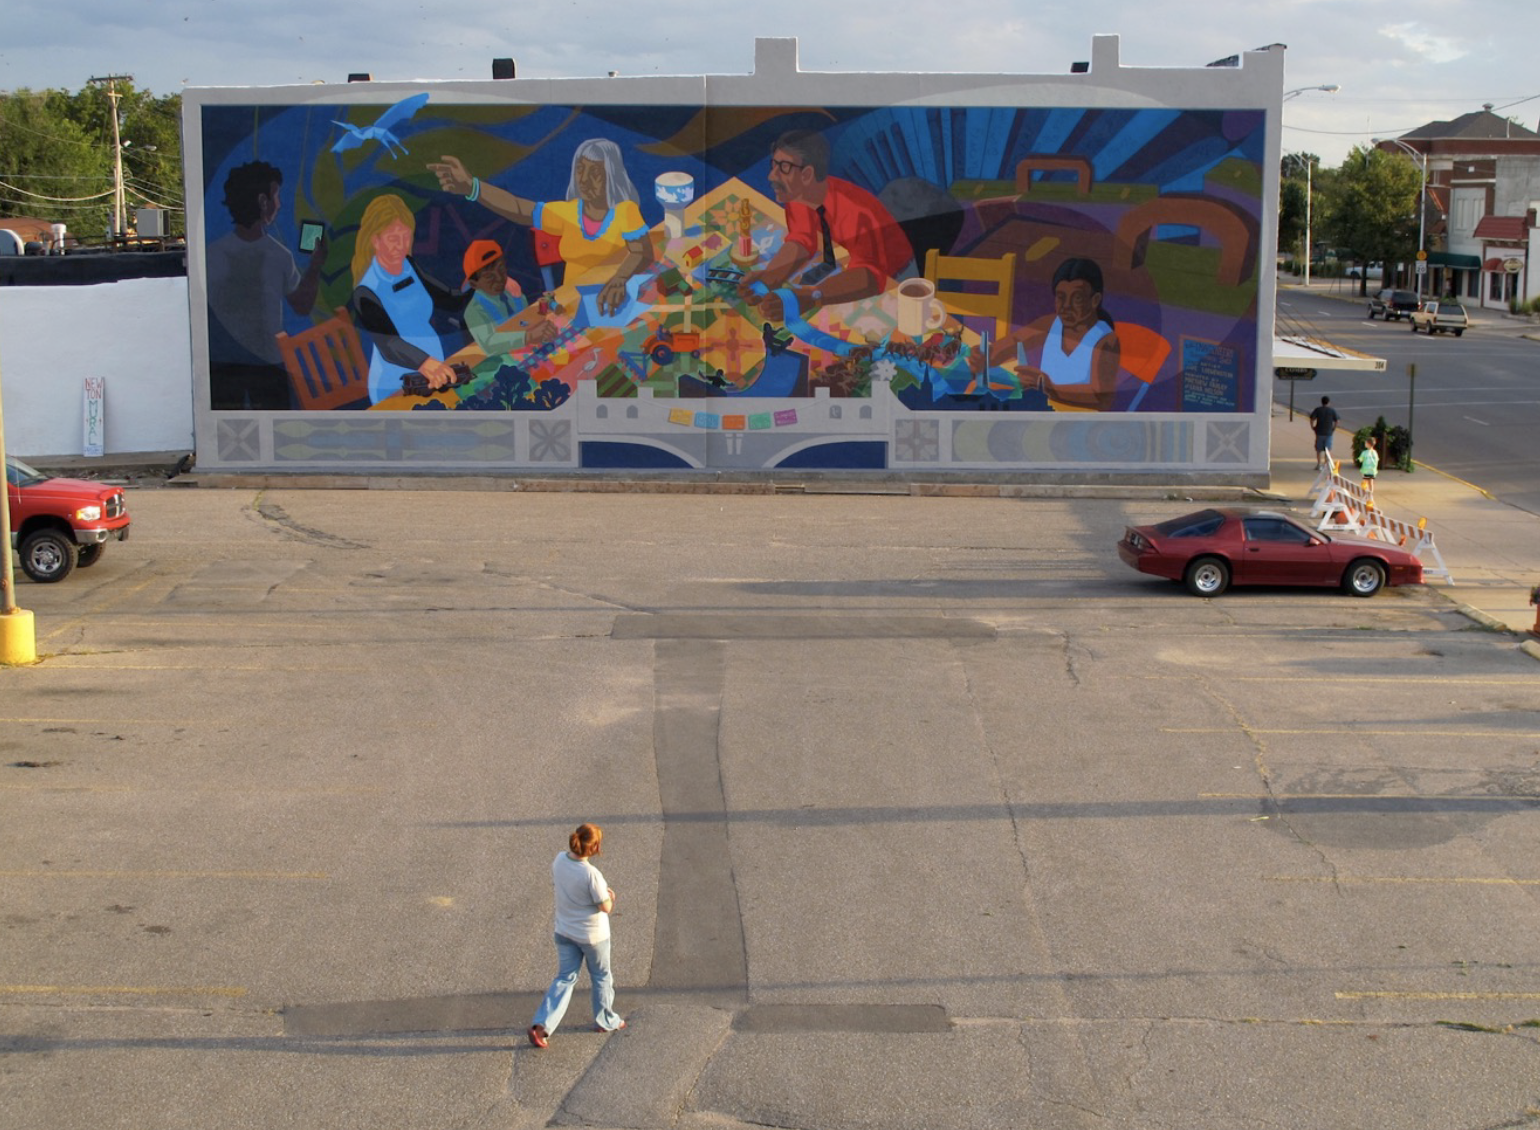 If These Walls Could Talk: Kansas Murals Event Image